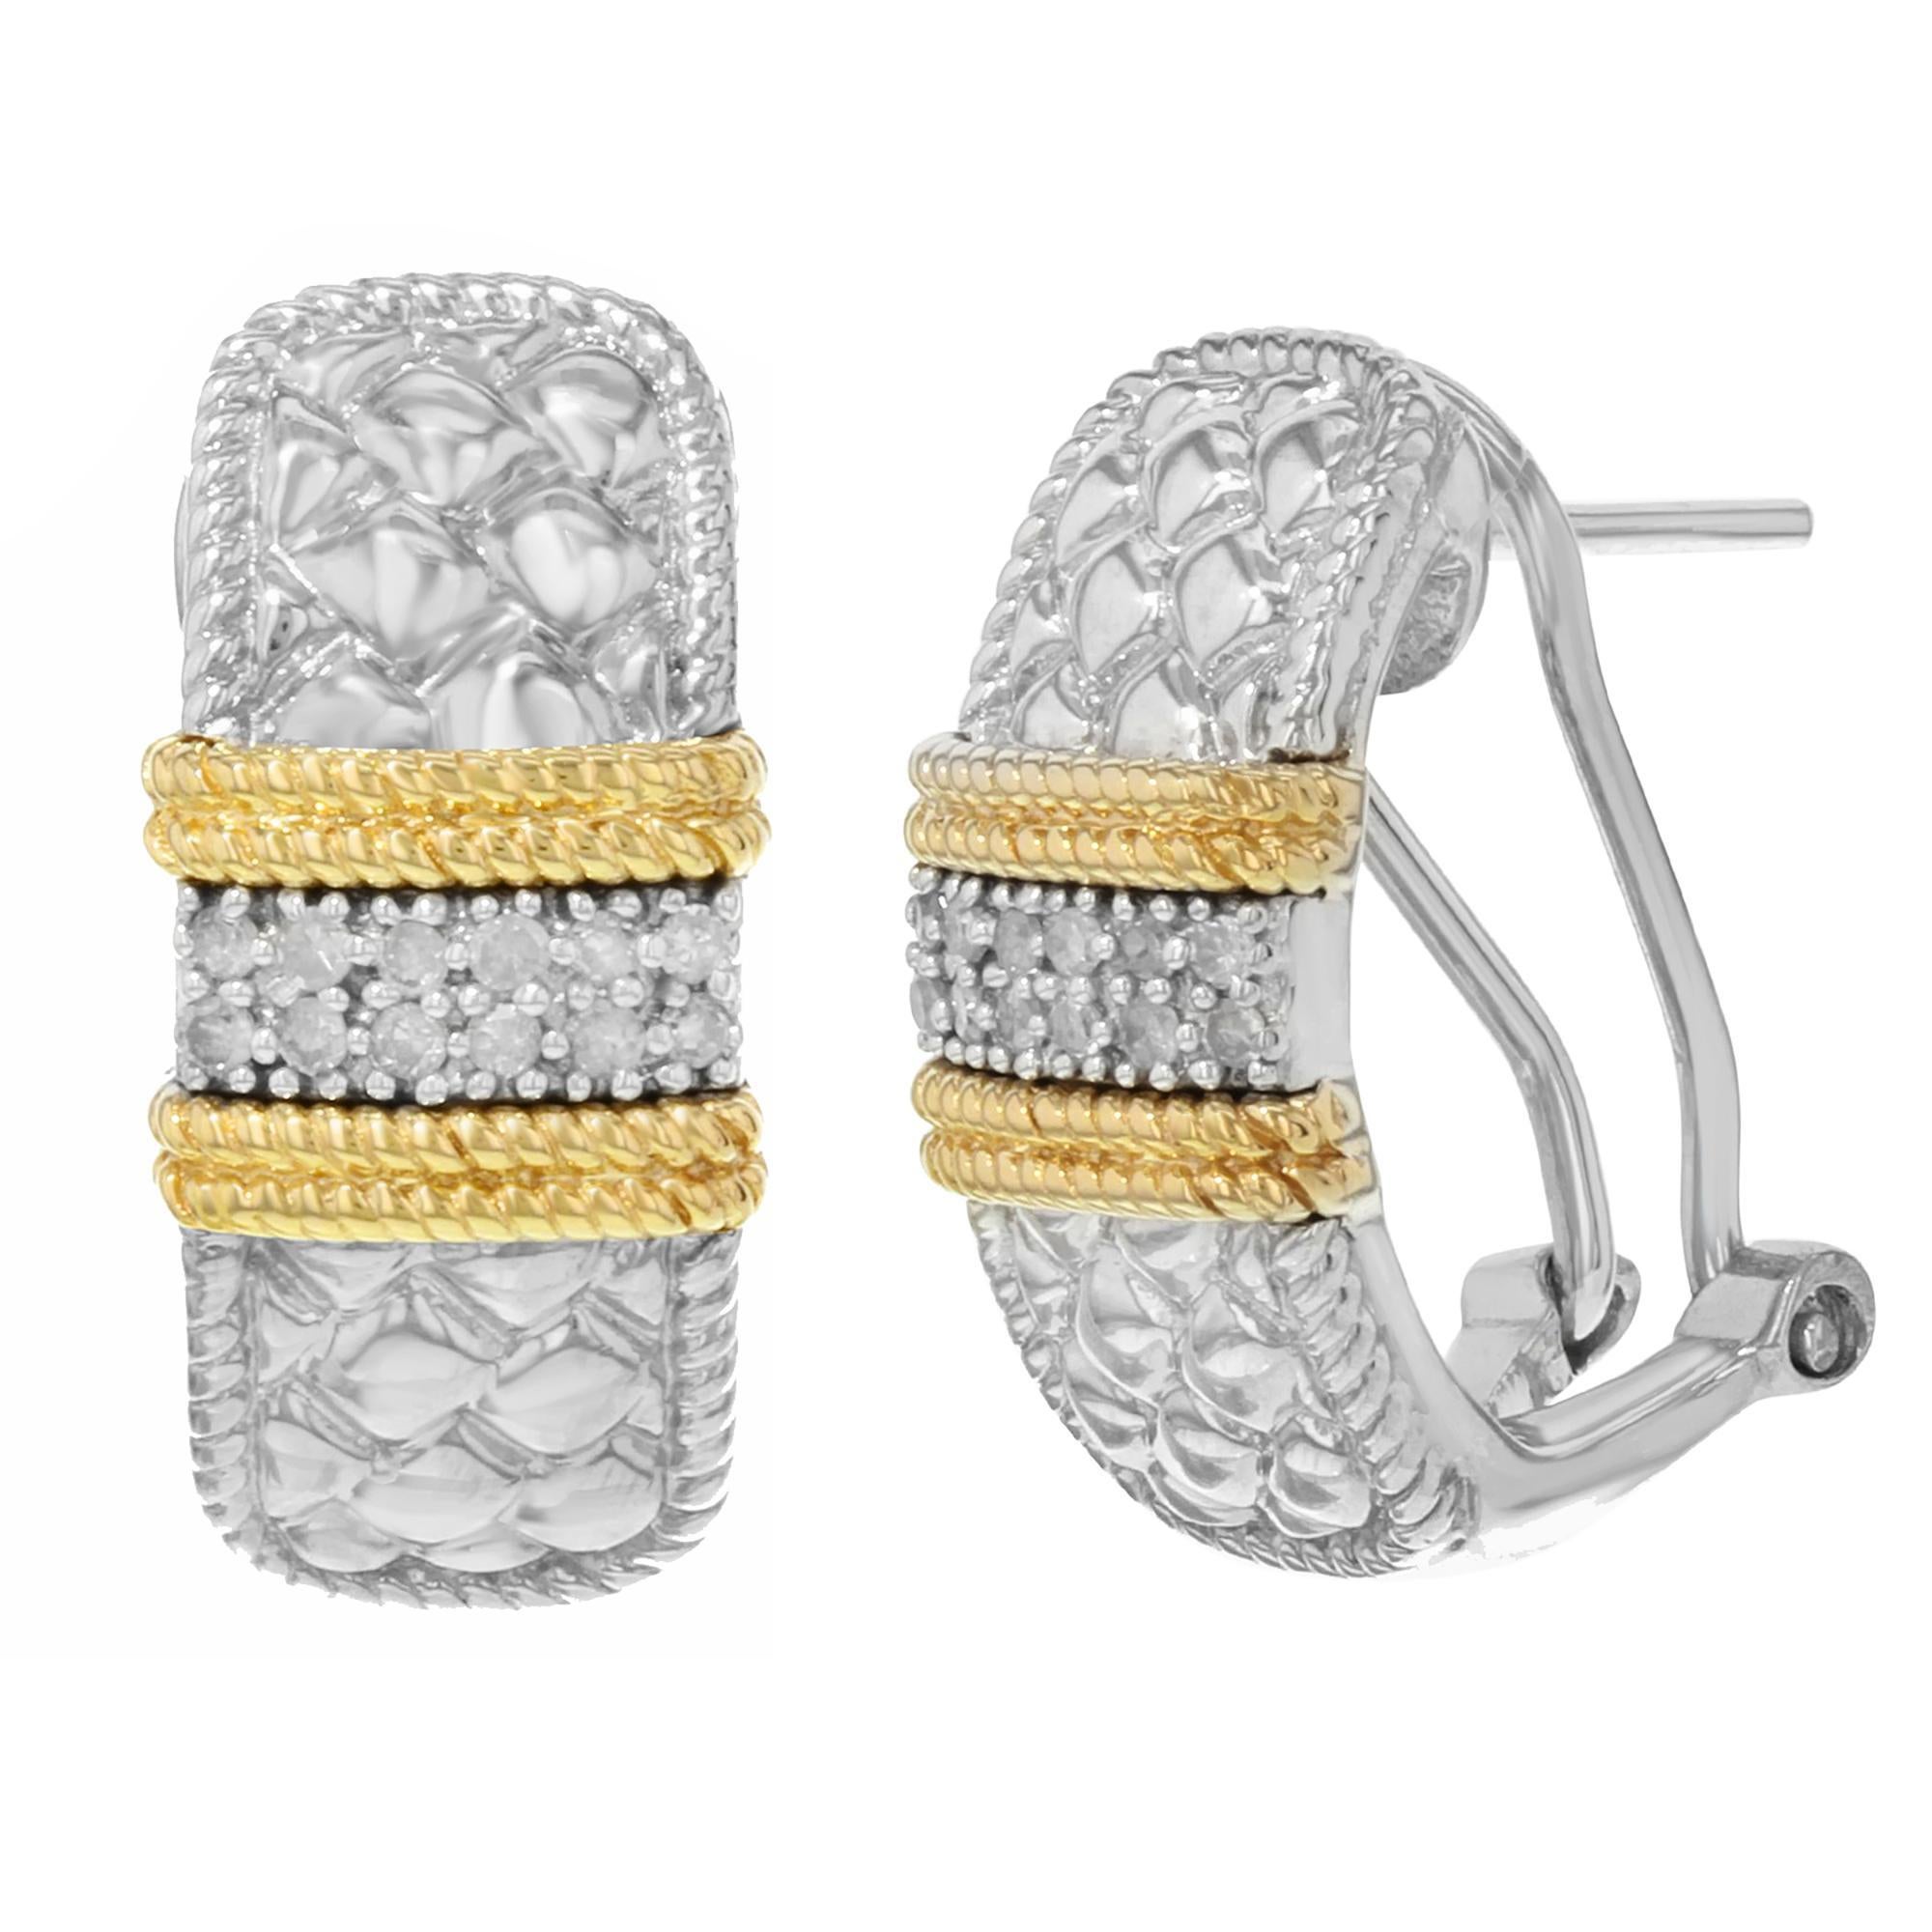 These Huggi earrings are crafted in 14k white & yellow gold. Encrusted with appx. 0.03 cttw diamonds. Length of the earring is 18.2mm, total weight 7.9 g. The earrings come with a gift box and an appraisal card.